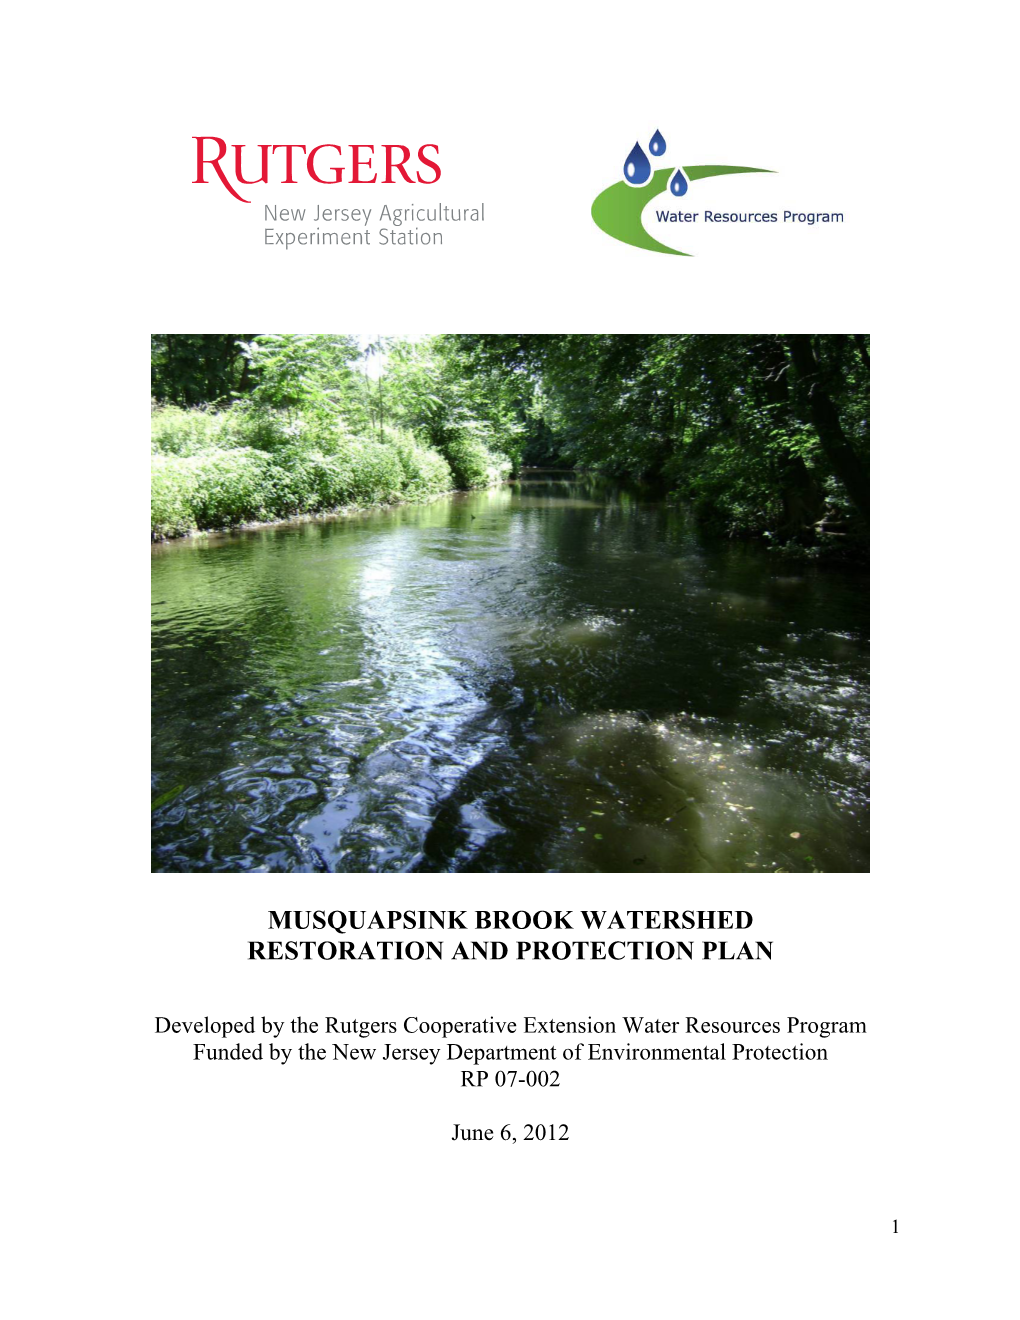 Musquapsink Brook Watershed Restoration and Protection Plan